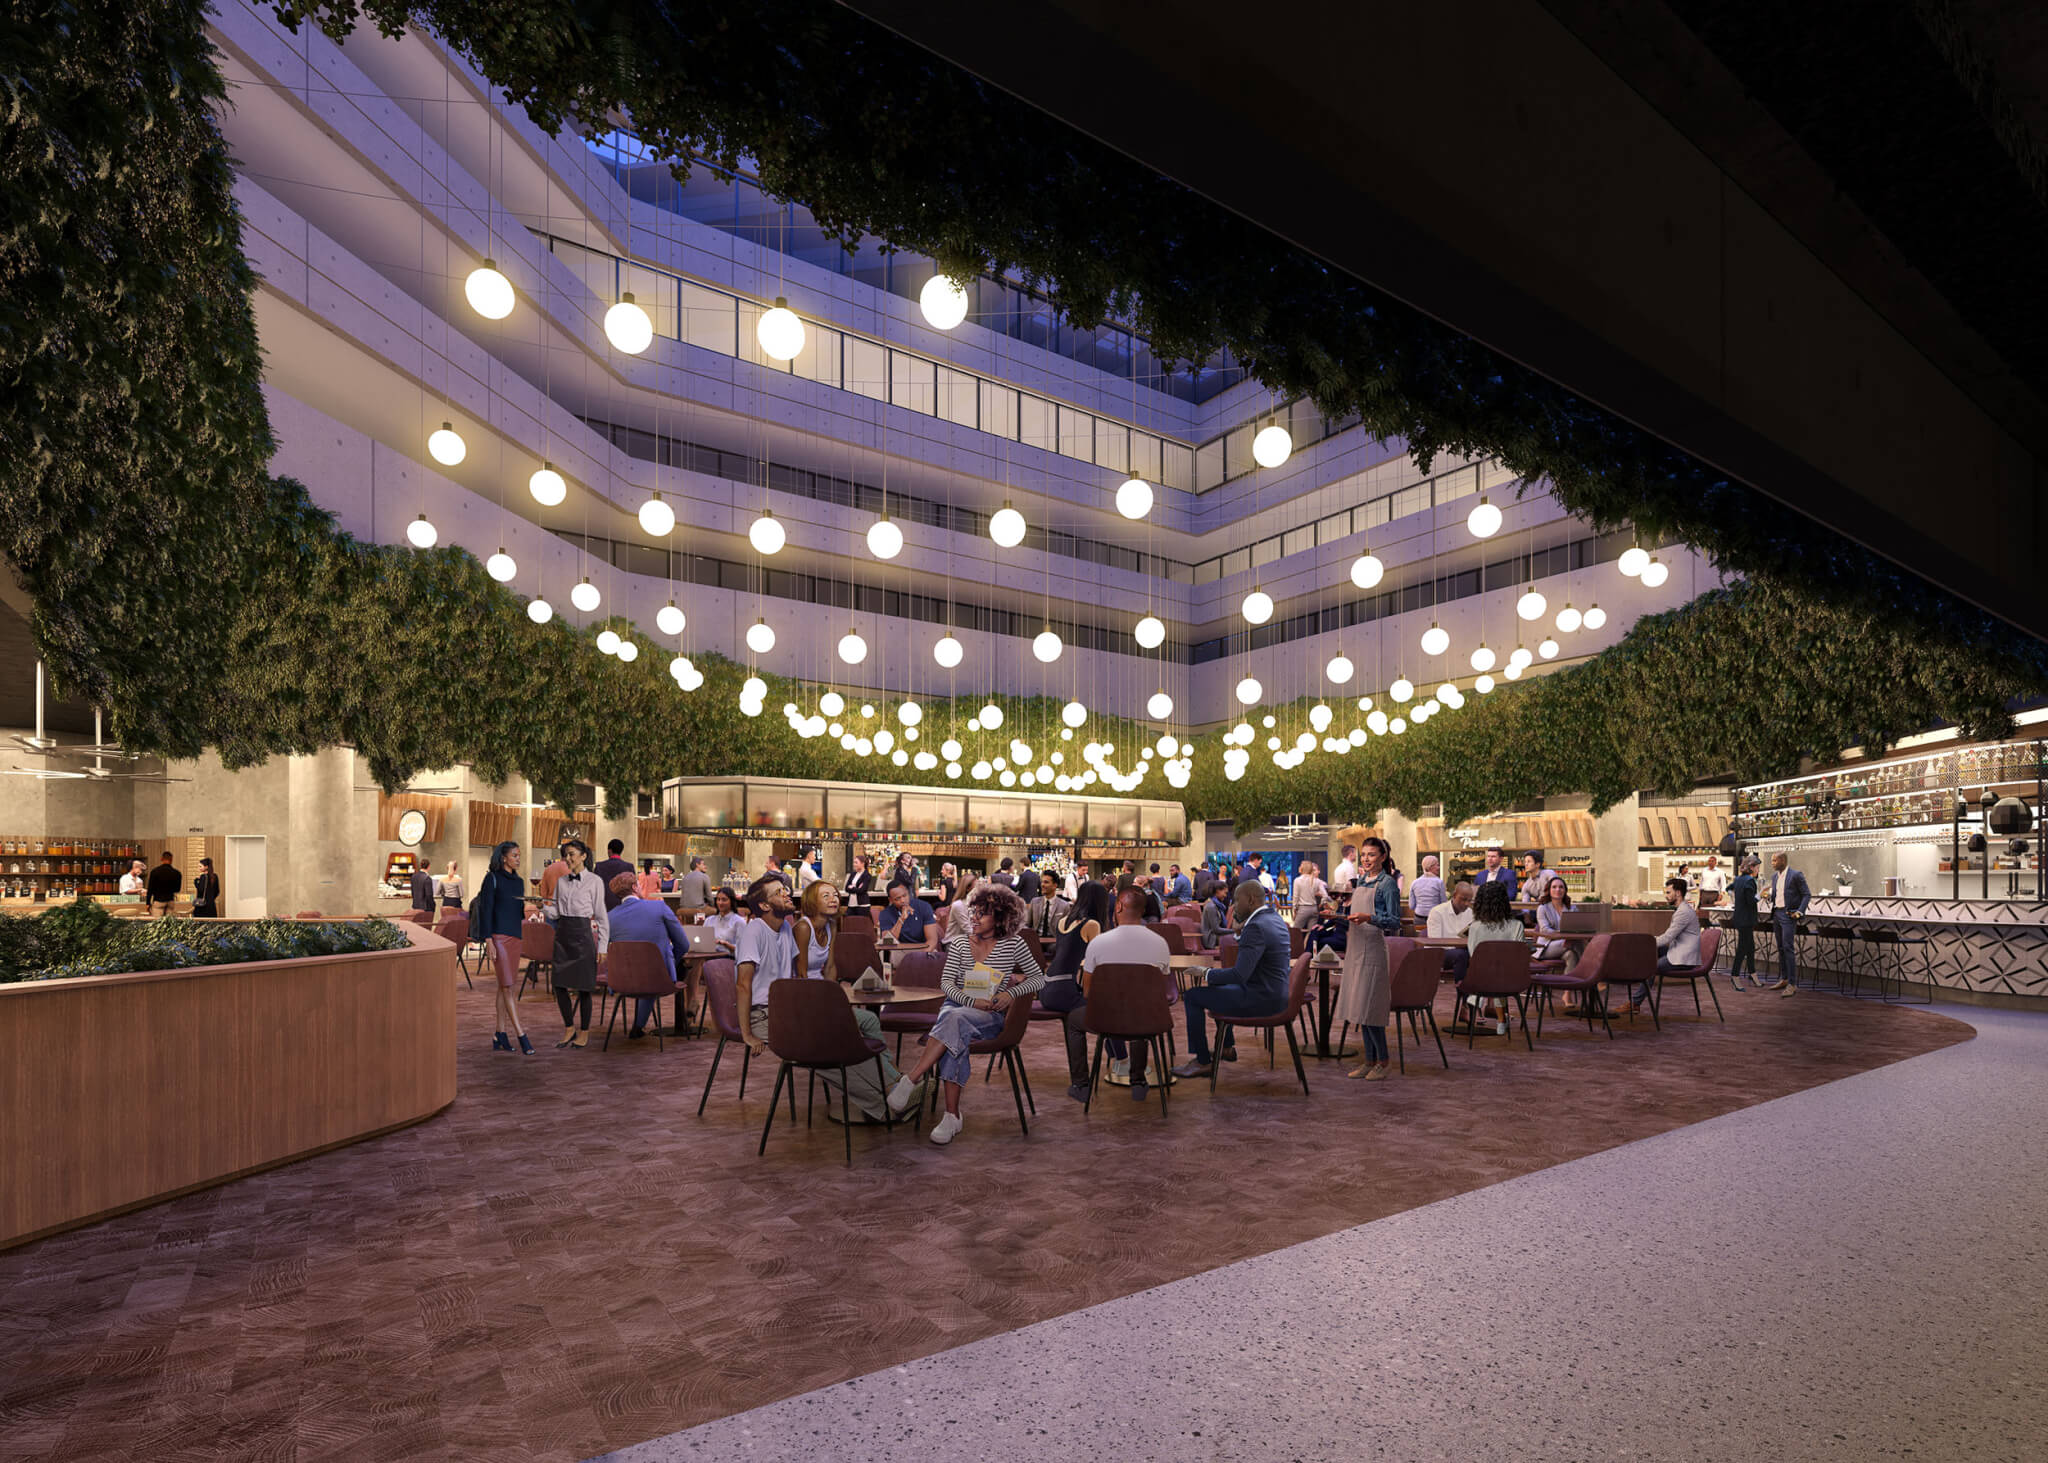 rendering of a food hall